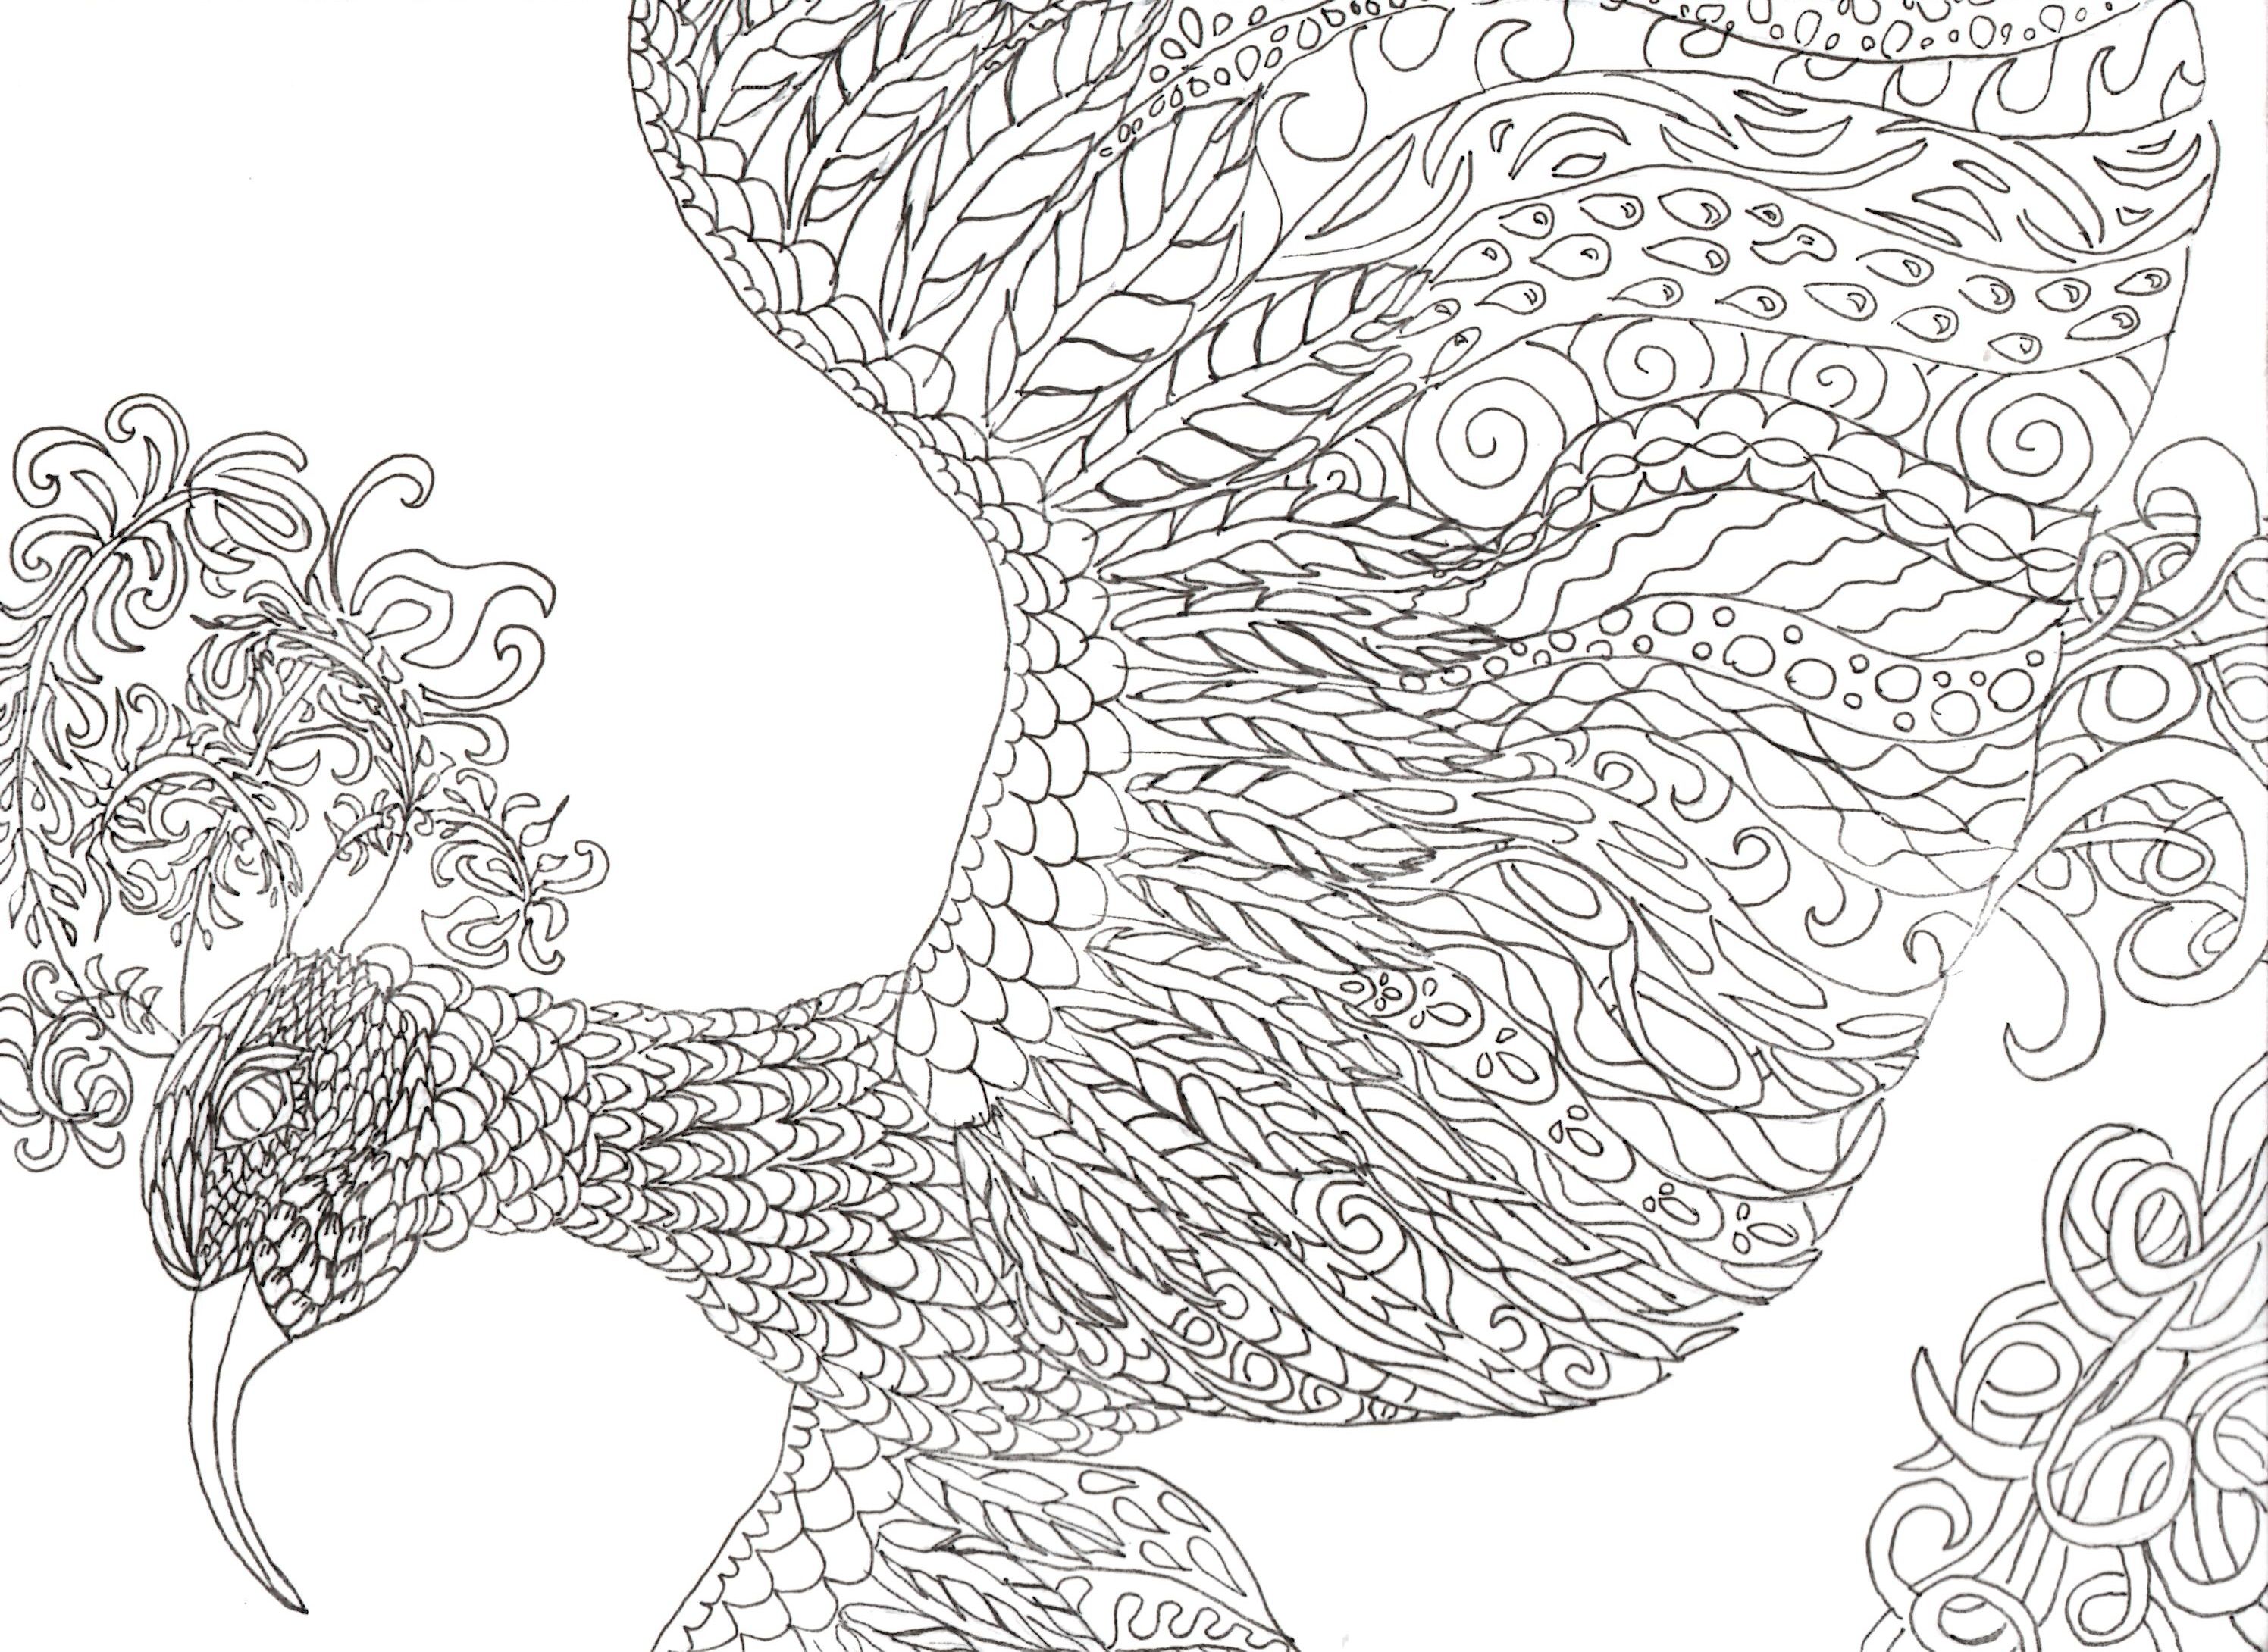 FREE! Adult Coloring Book Page – Fantasy Bird | Jeanine A Thriver